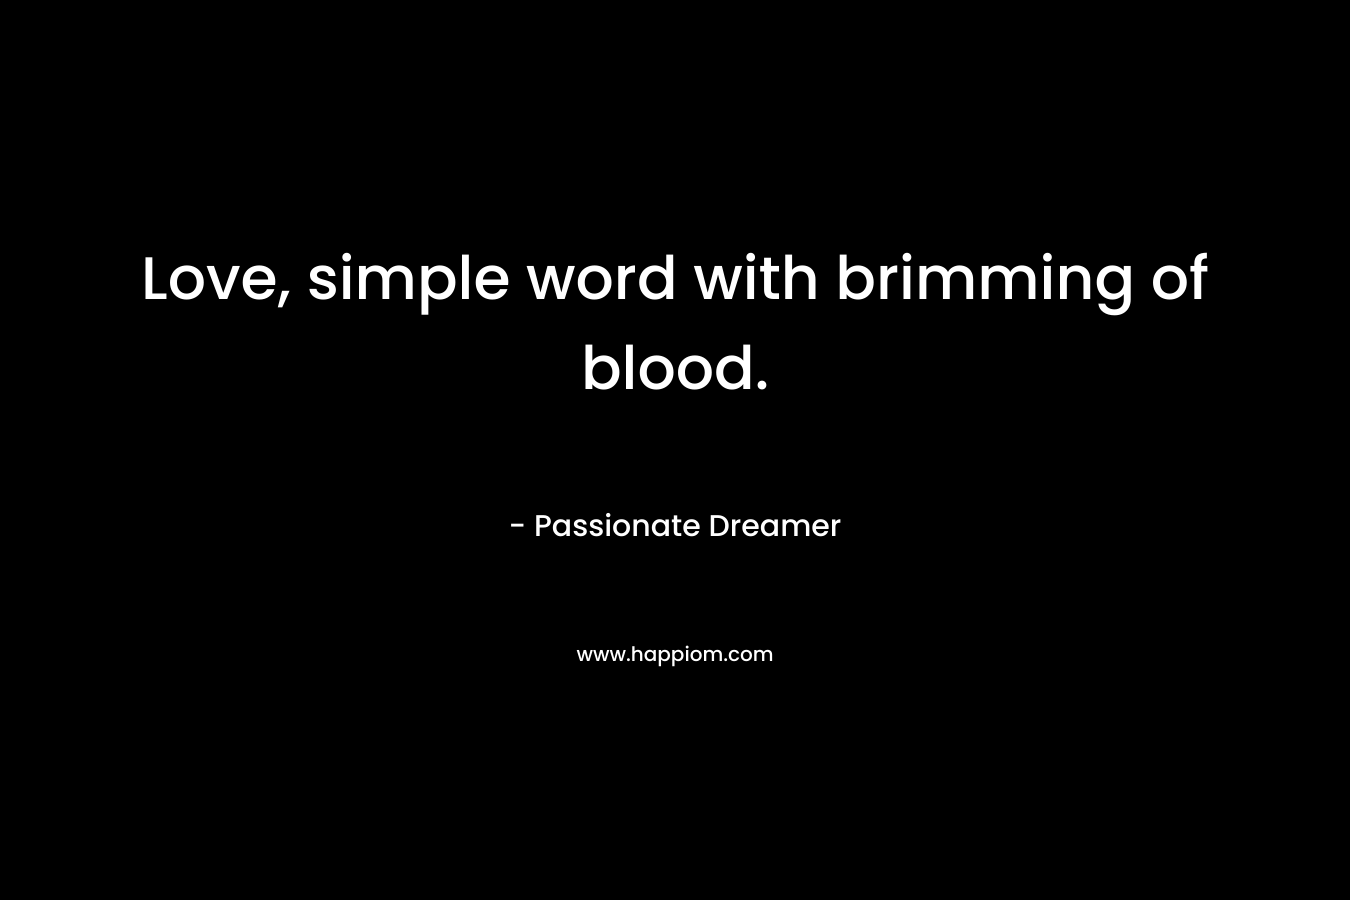 Love, simple word with brimming of blood. – Passionate Dreamer